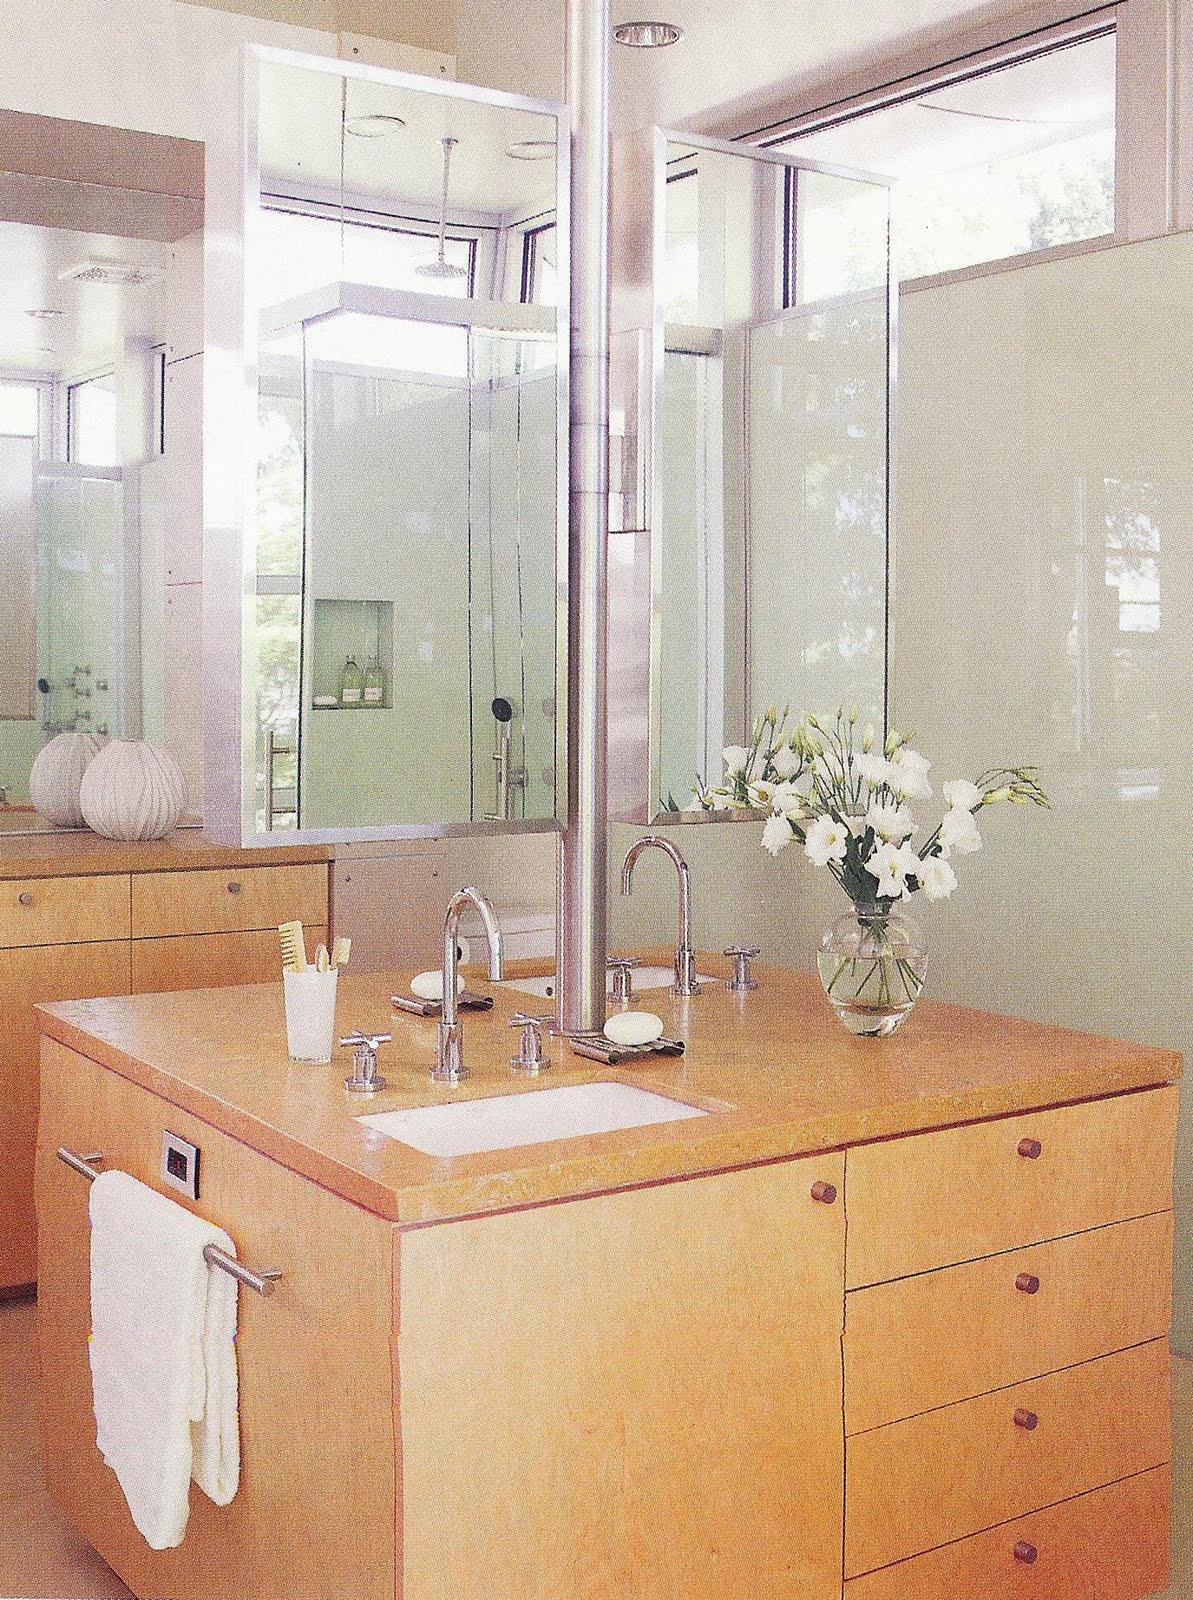 The Kitchen and Bath People Bathroom Ideas "Outside the Box"